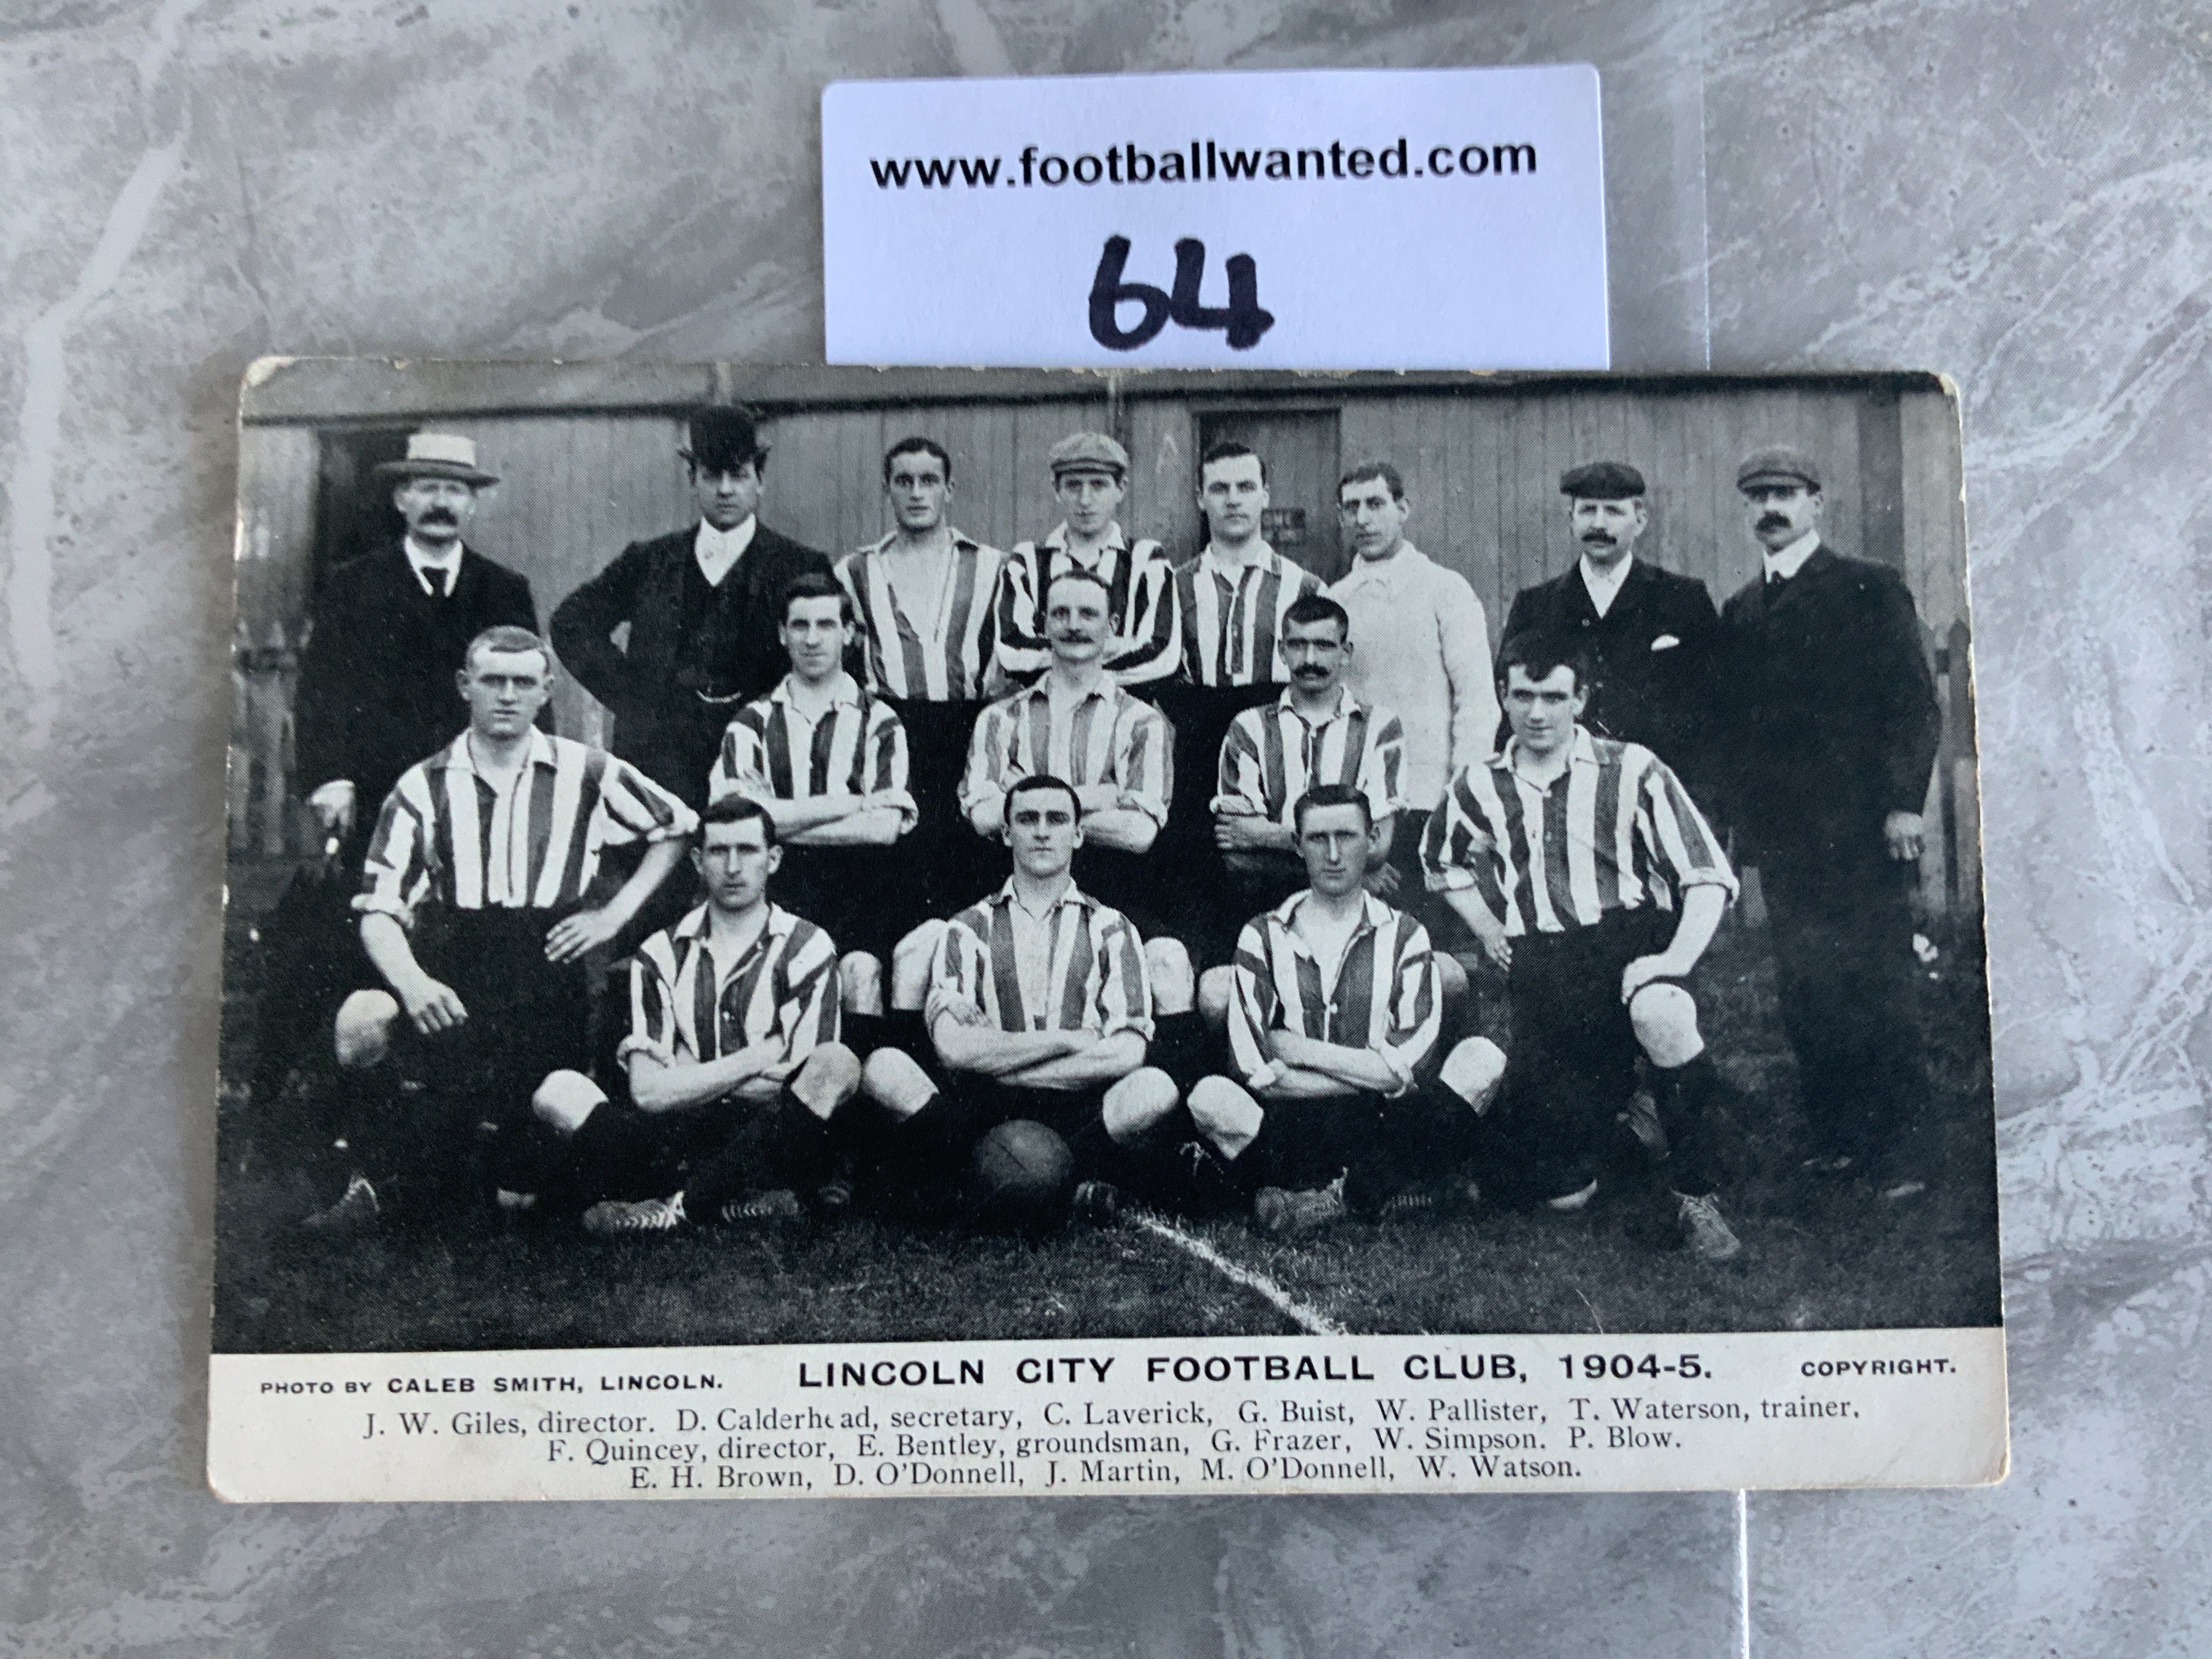 Lincoln City 1904/1905 Football Team Postcard: Good condition with players names underneath. No